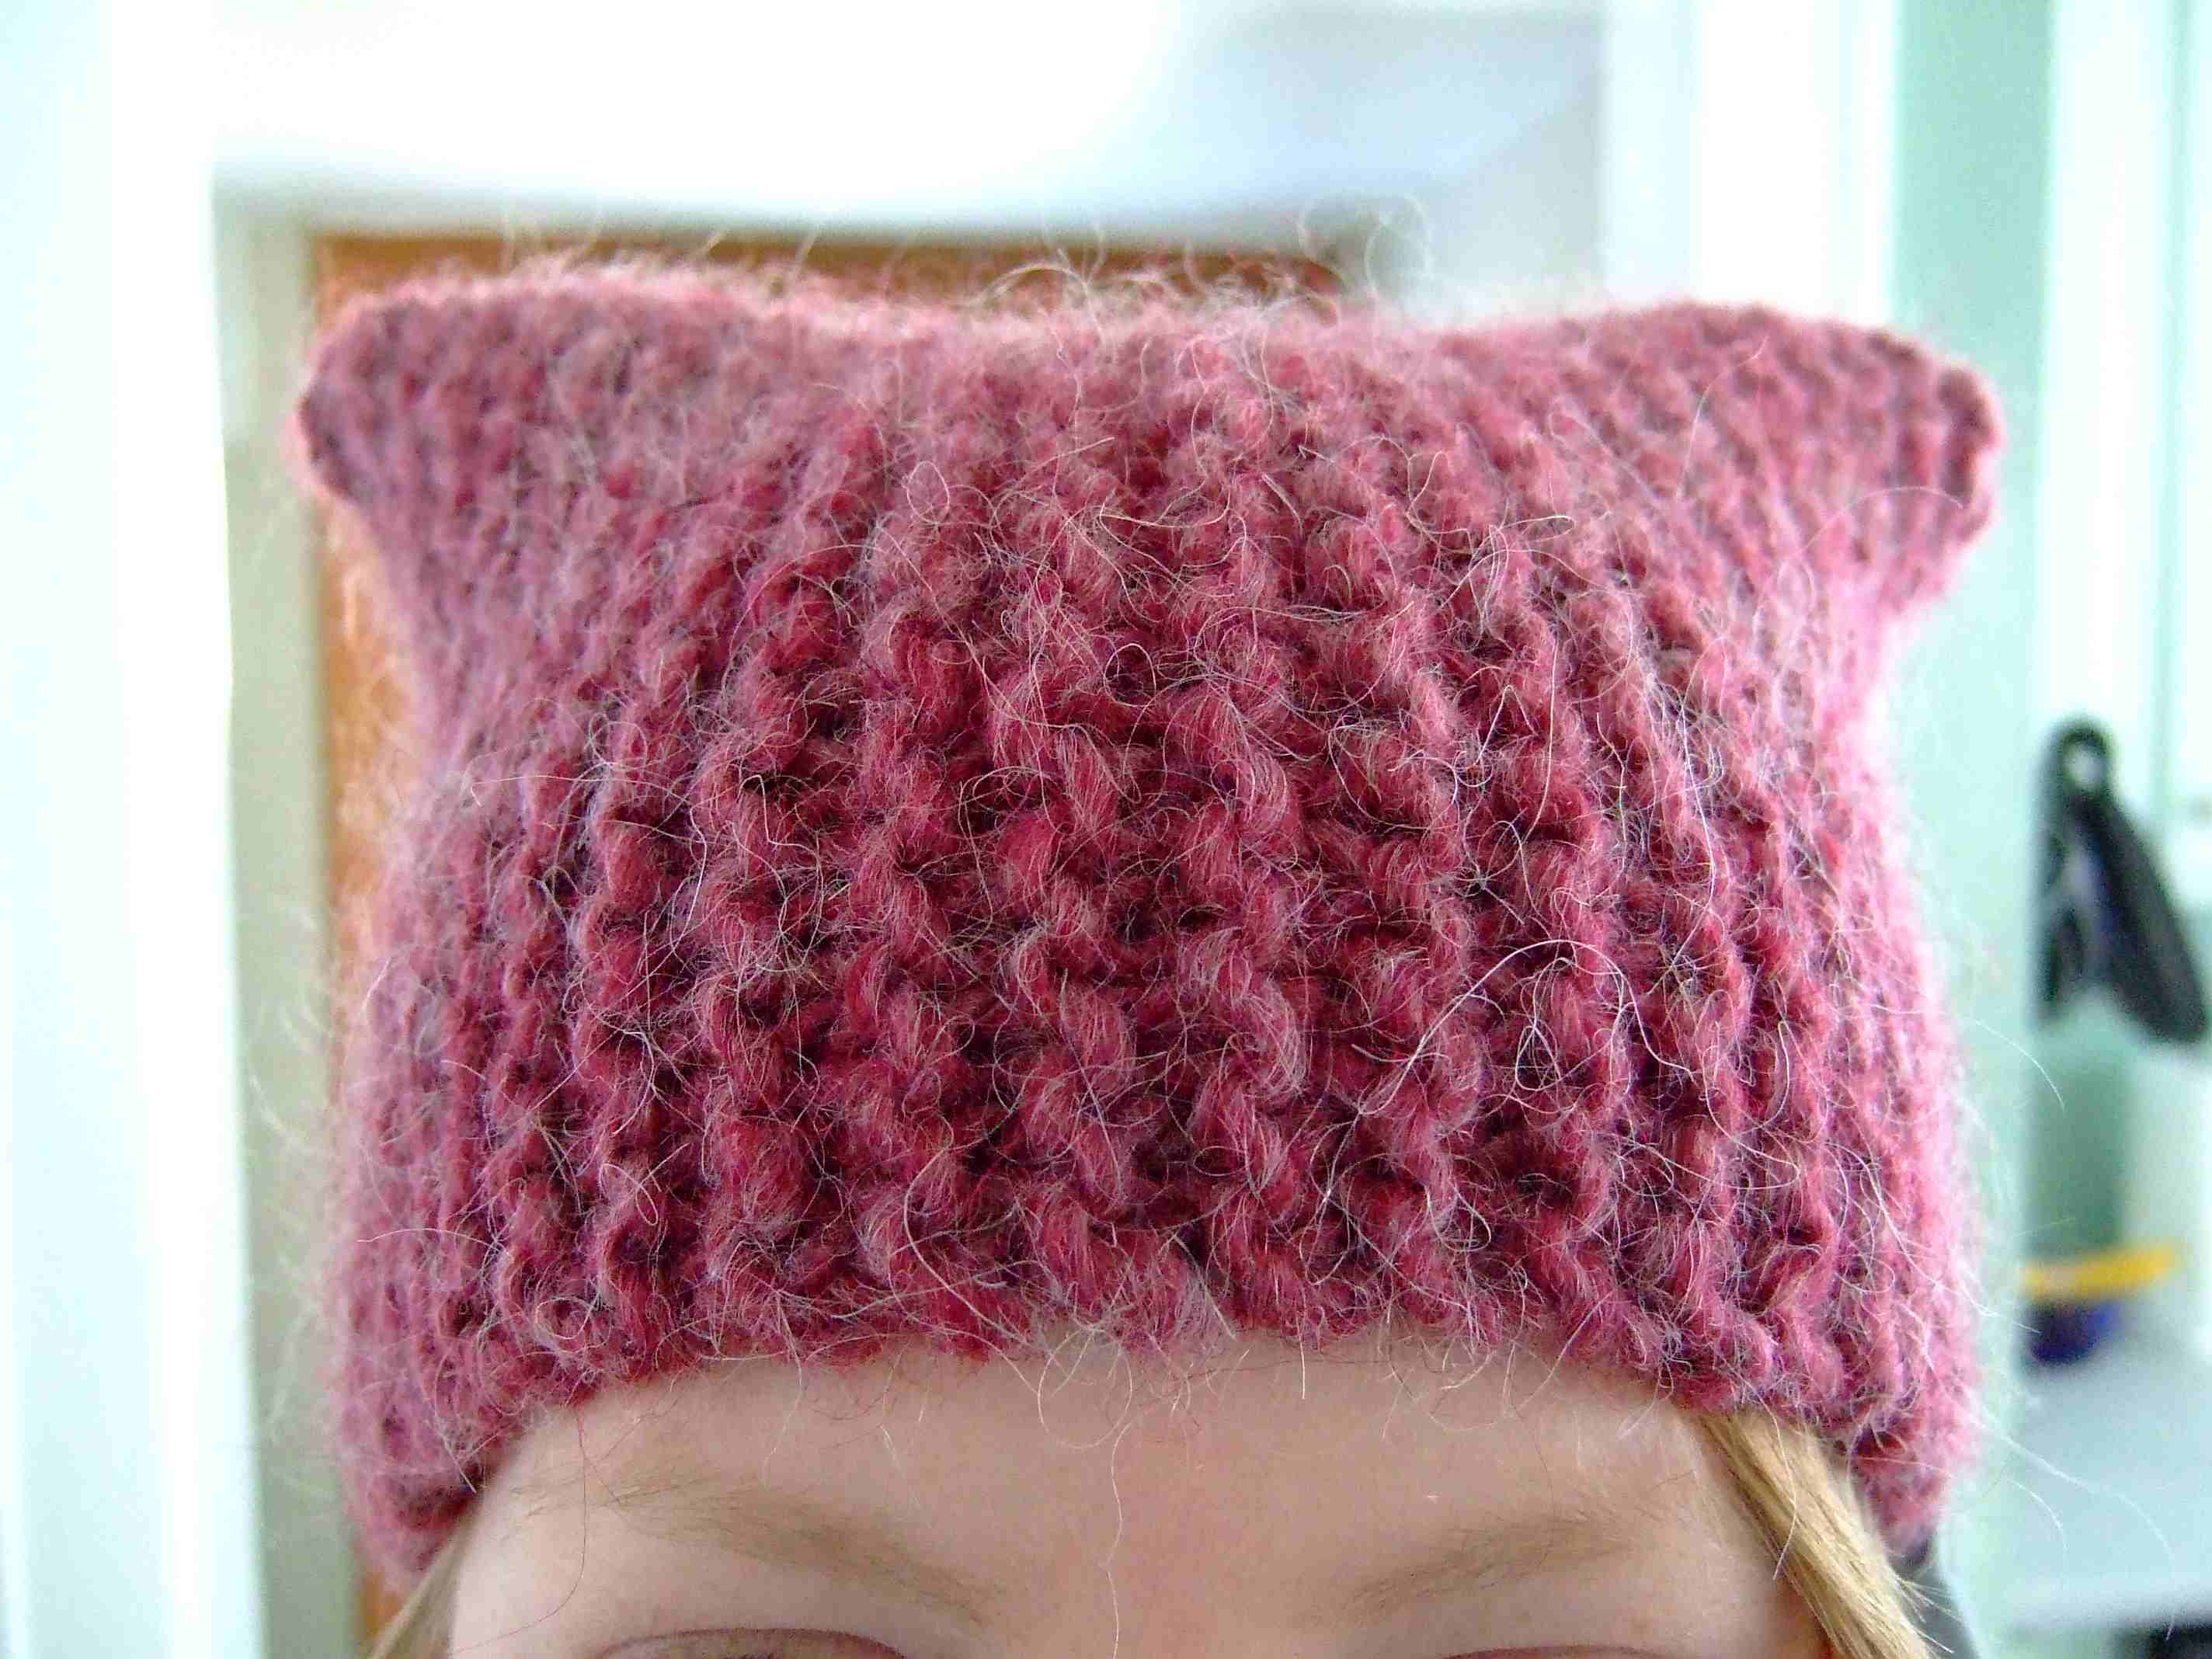 Free Knitting Patterns: Hats - Learn How to Knit | KnittingHelp.com